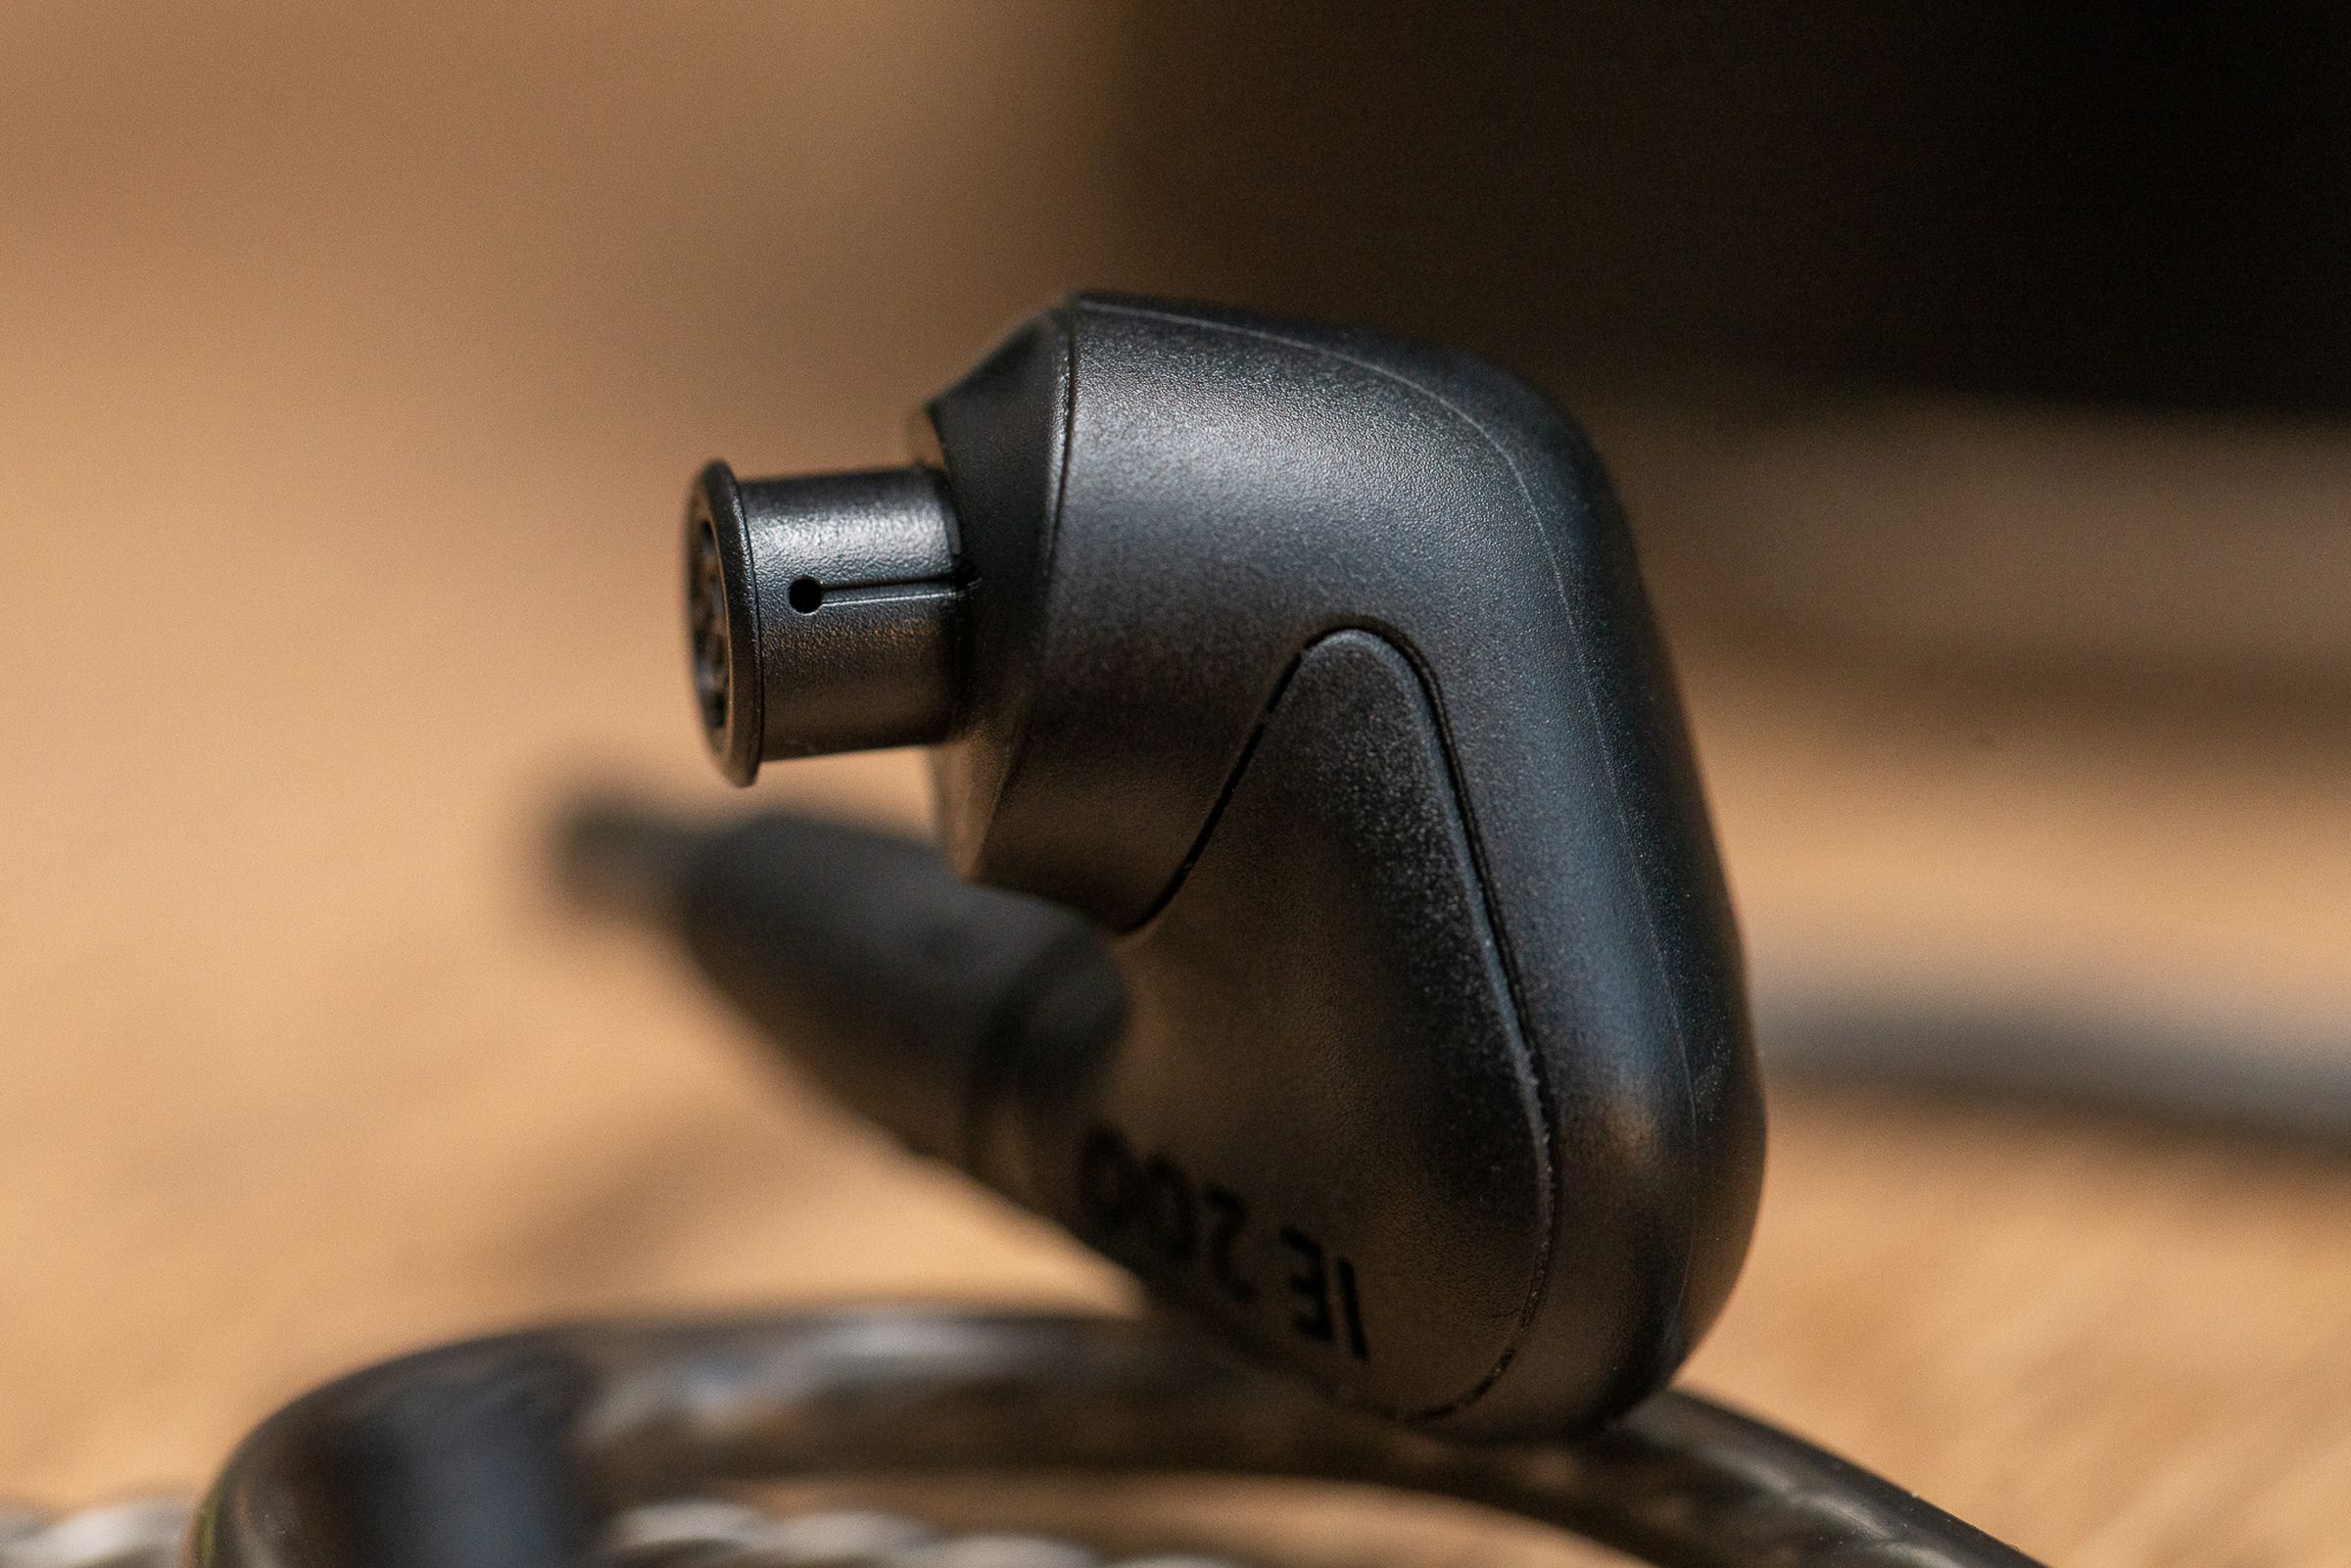 A close-up of Sennheiser’s IE 200 earbuds.